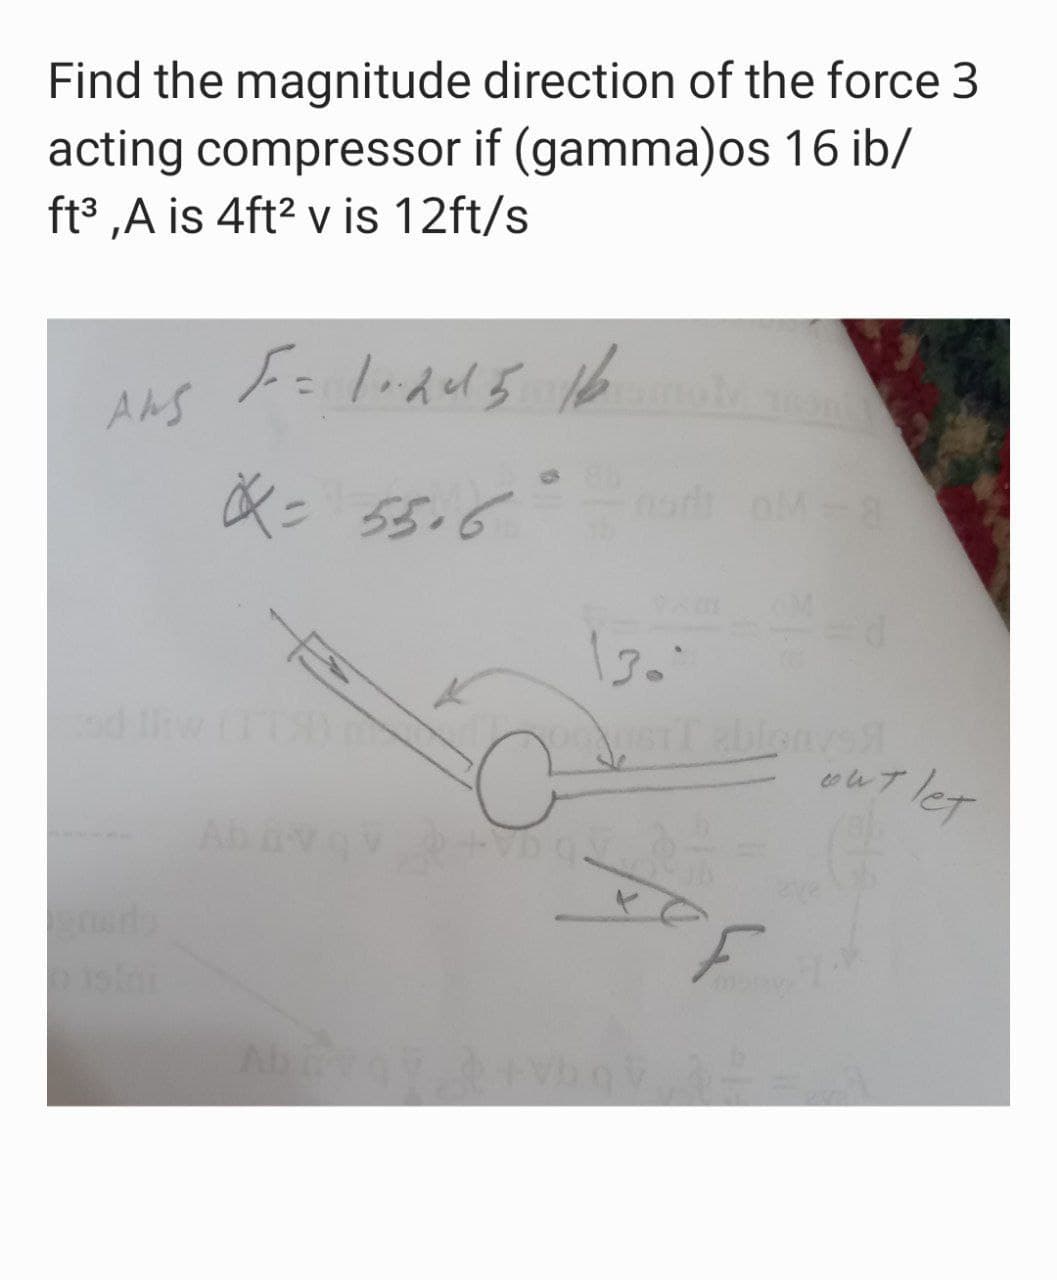 Find the magnitude direction of the force 3
acting compressor if (gamma)os 16 ib/
ft³ ,A is 4ft? v is 12ft/s
ANS
X= 55.6
ablonys
let
Ab
eve
1.
Ab
